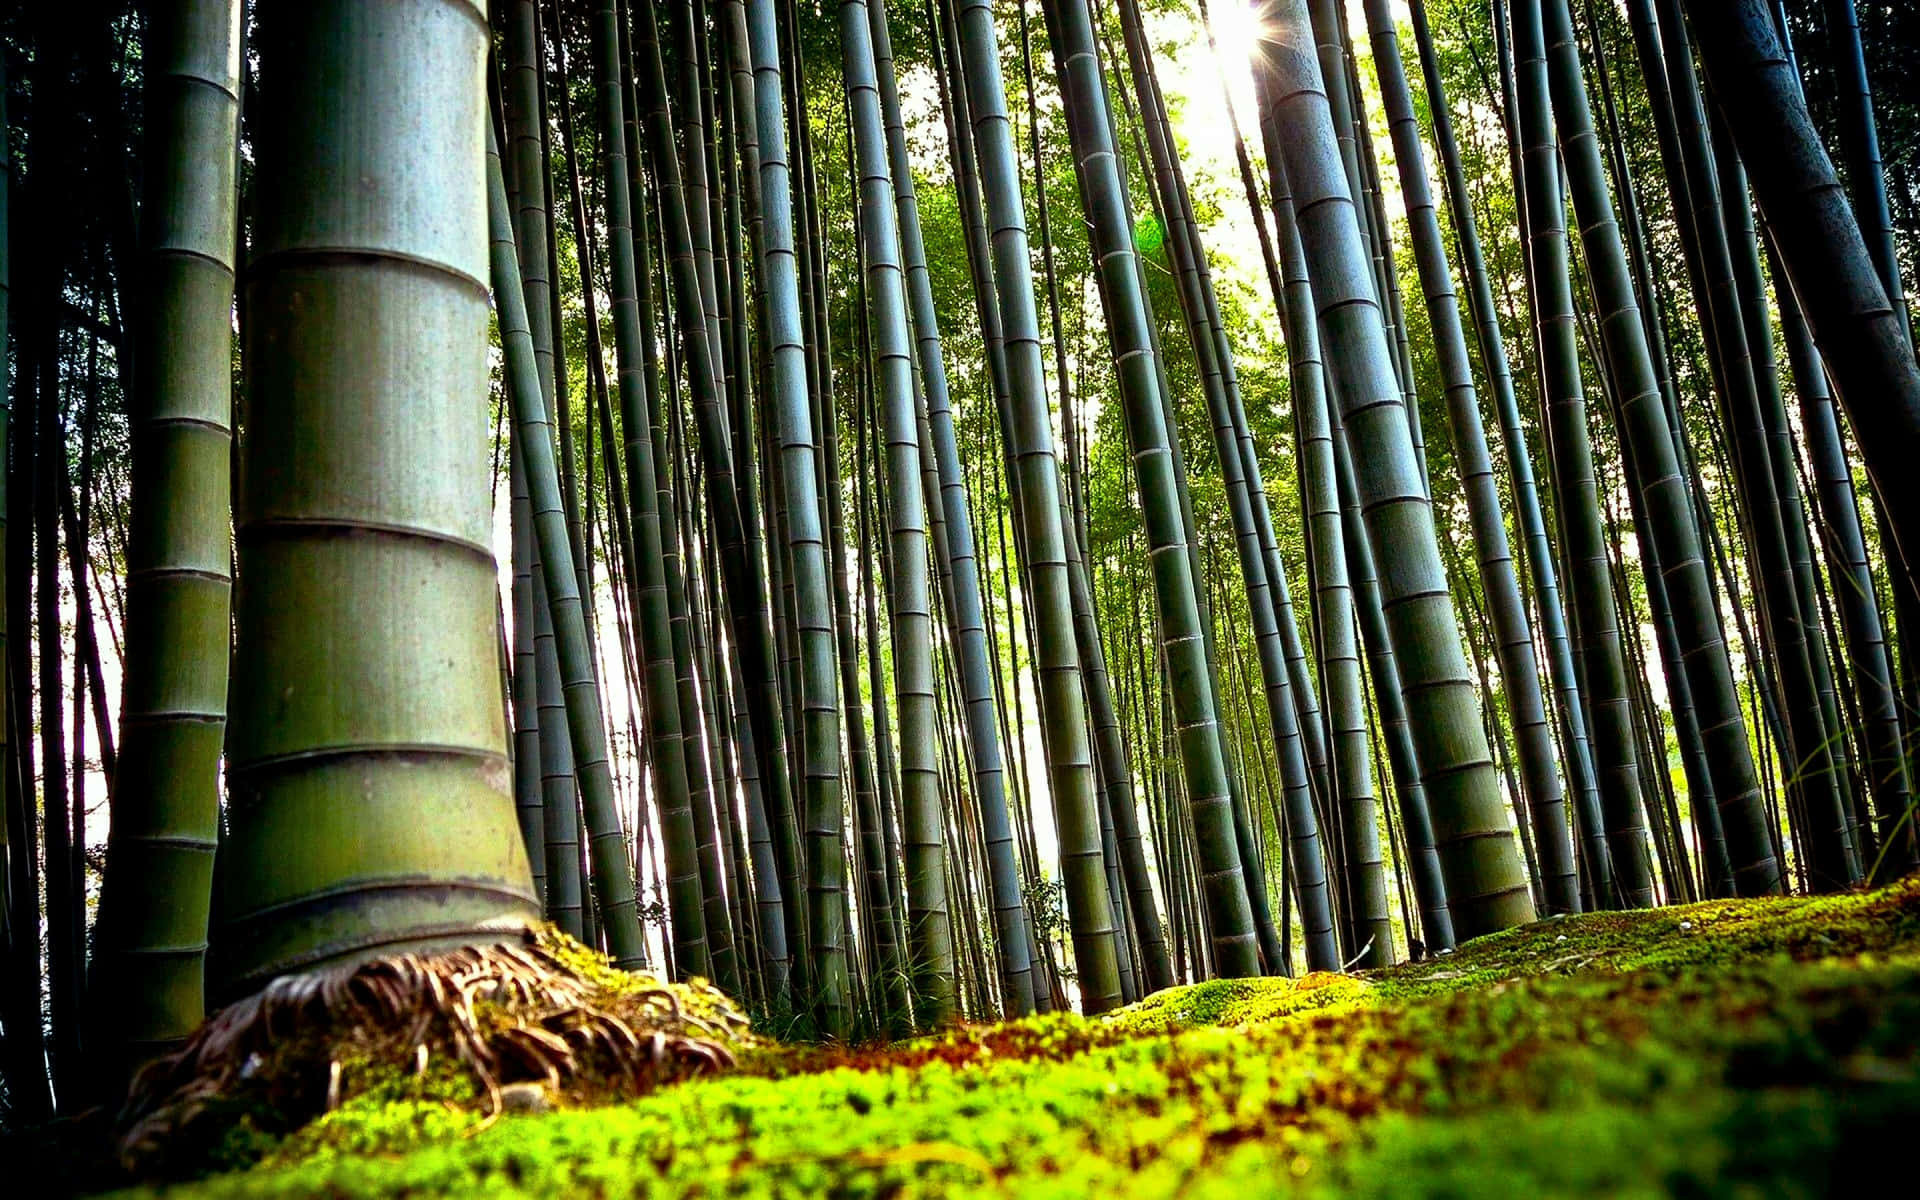 A peaceful view of a bamboo forest Wallpaper